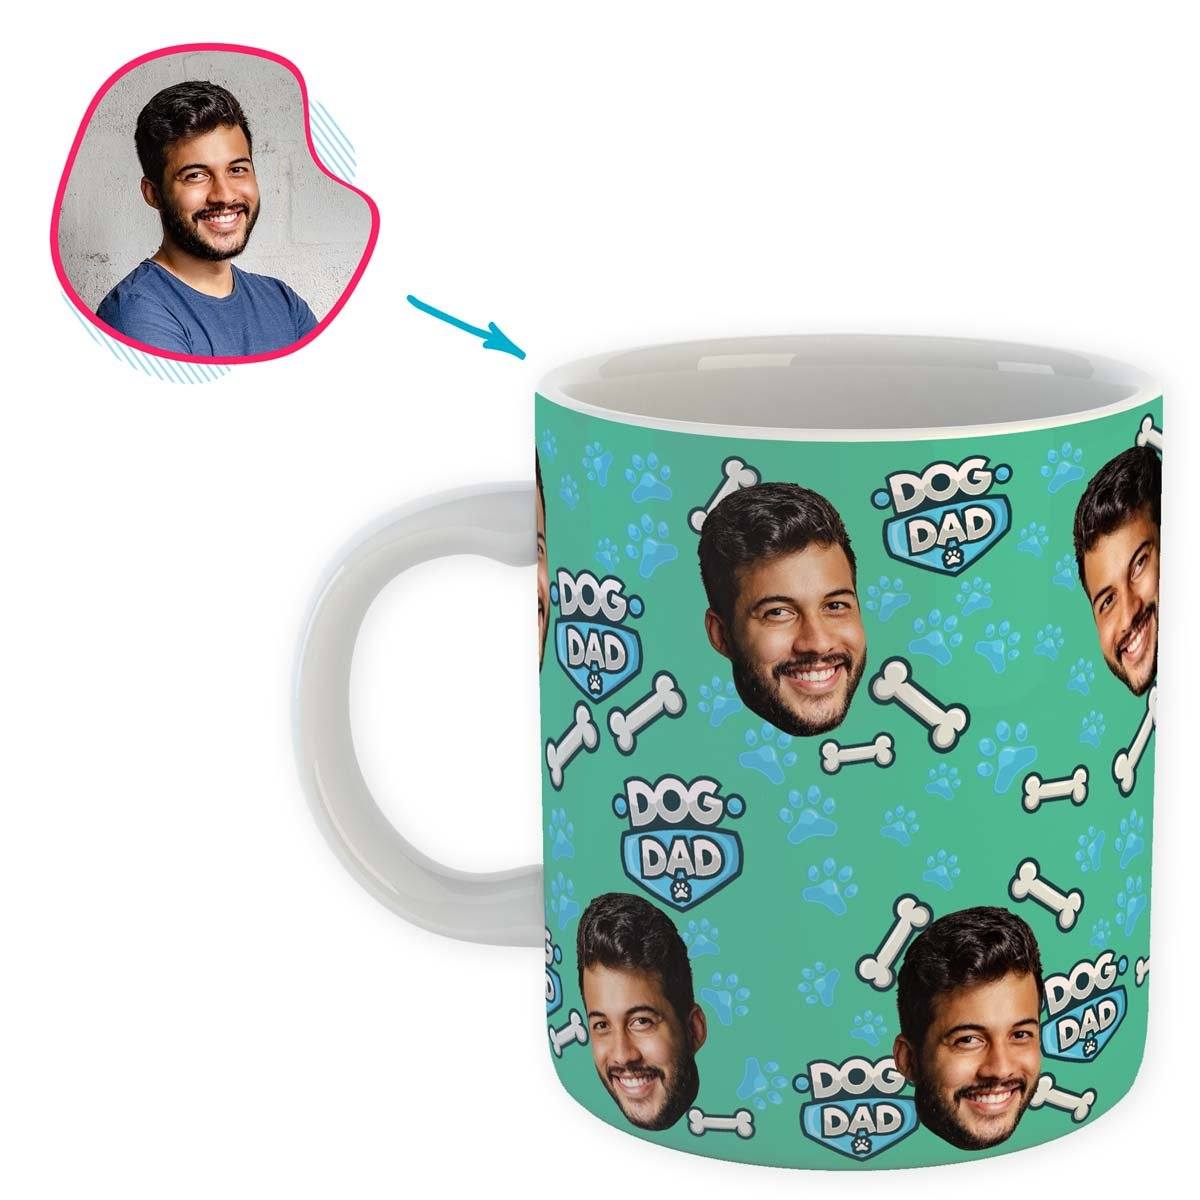 mint Dog Dad mug personalized with photo of face printed on it